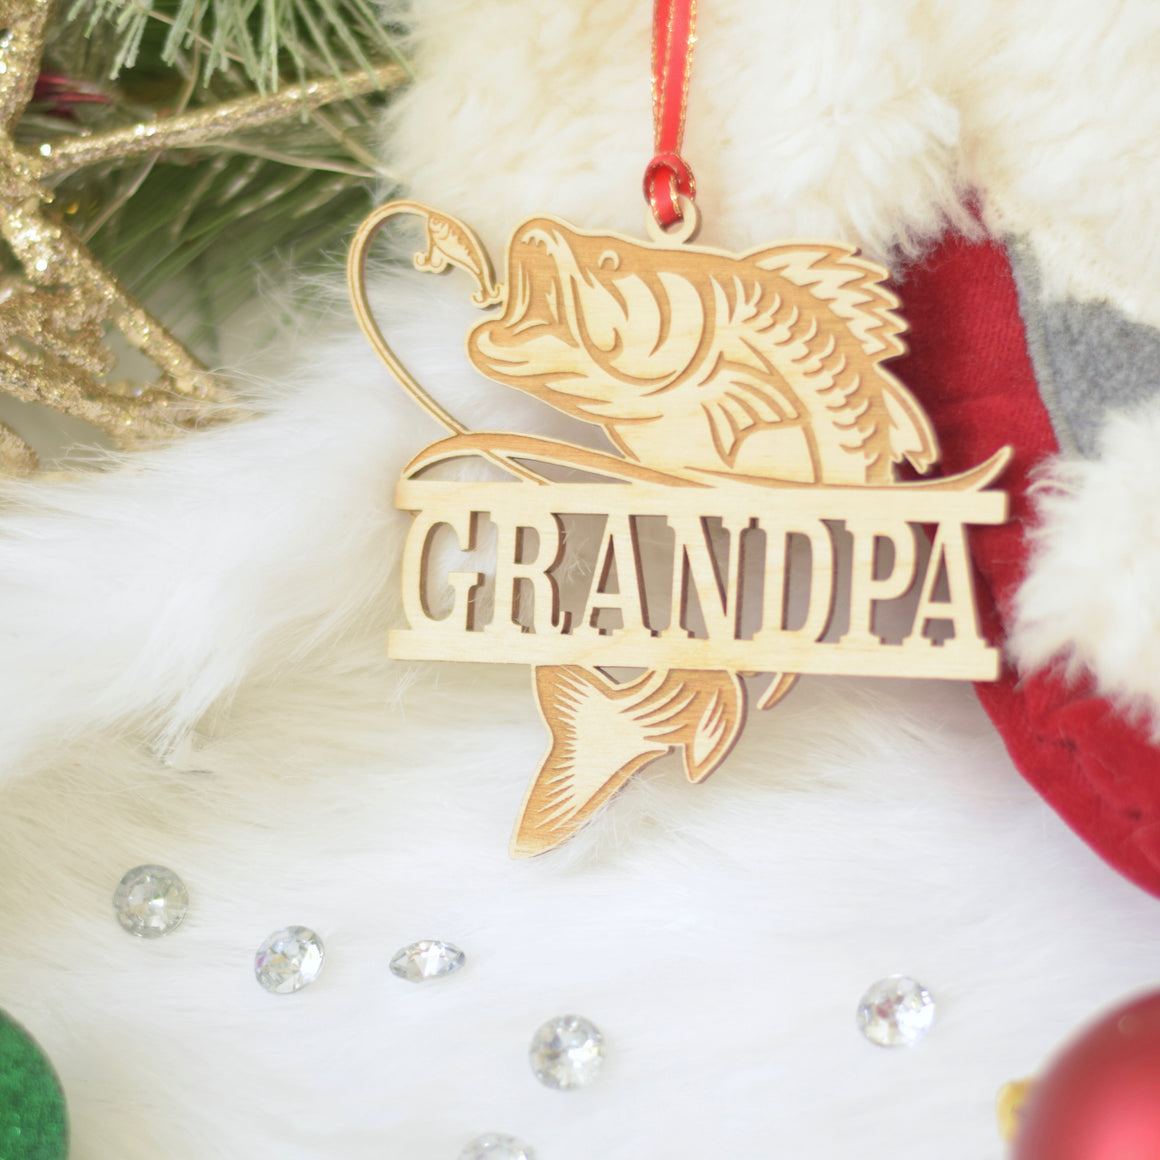 Grandpa fishing ornament on a stocking with Christmas greenery